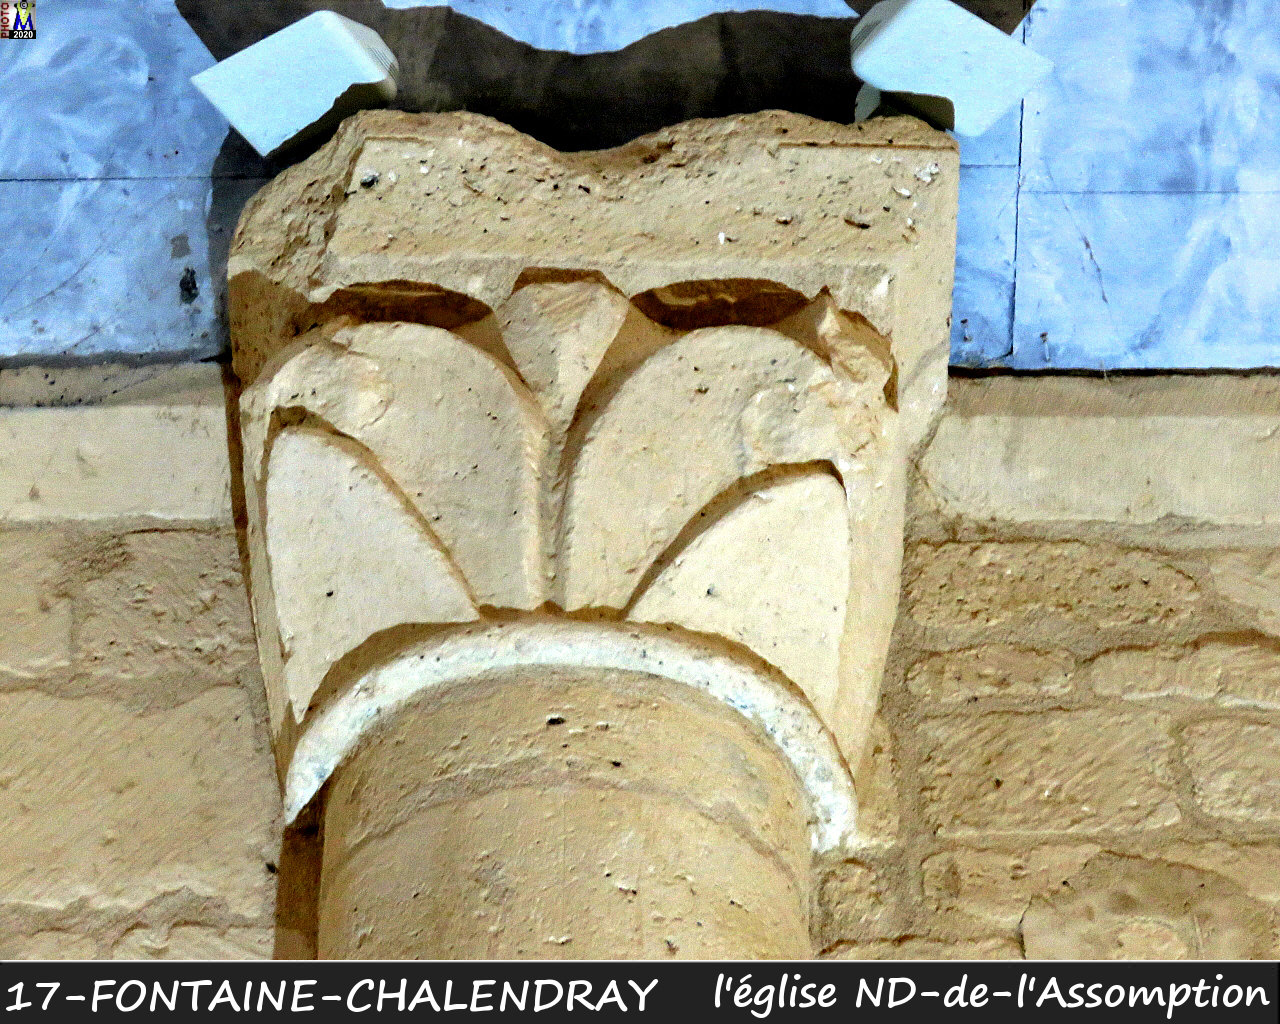 17FONTAINE-CHALENDRAY_eglise_1116.jpg